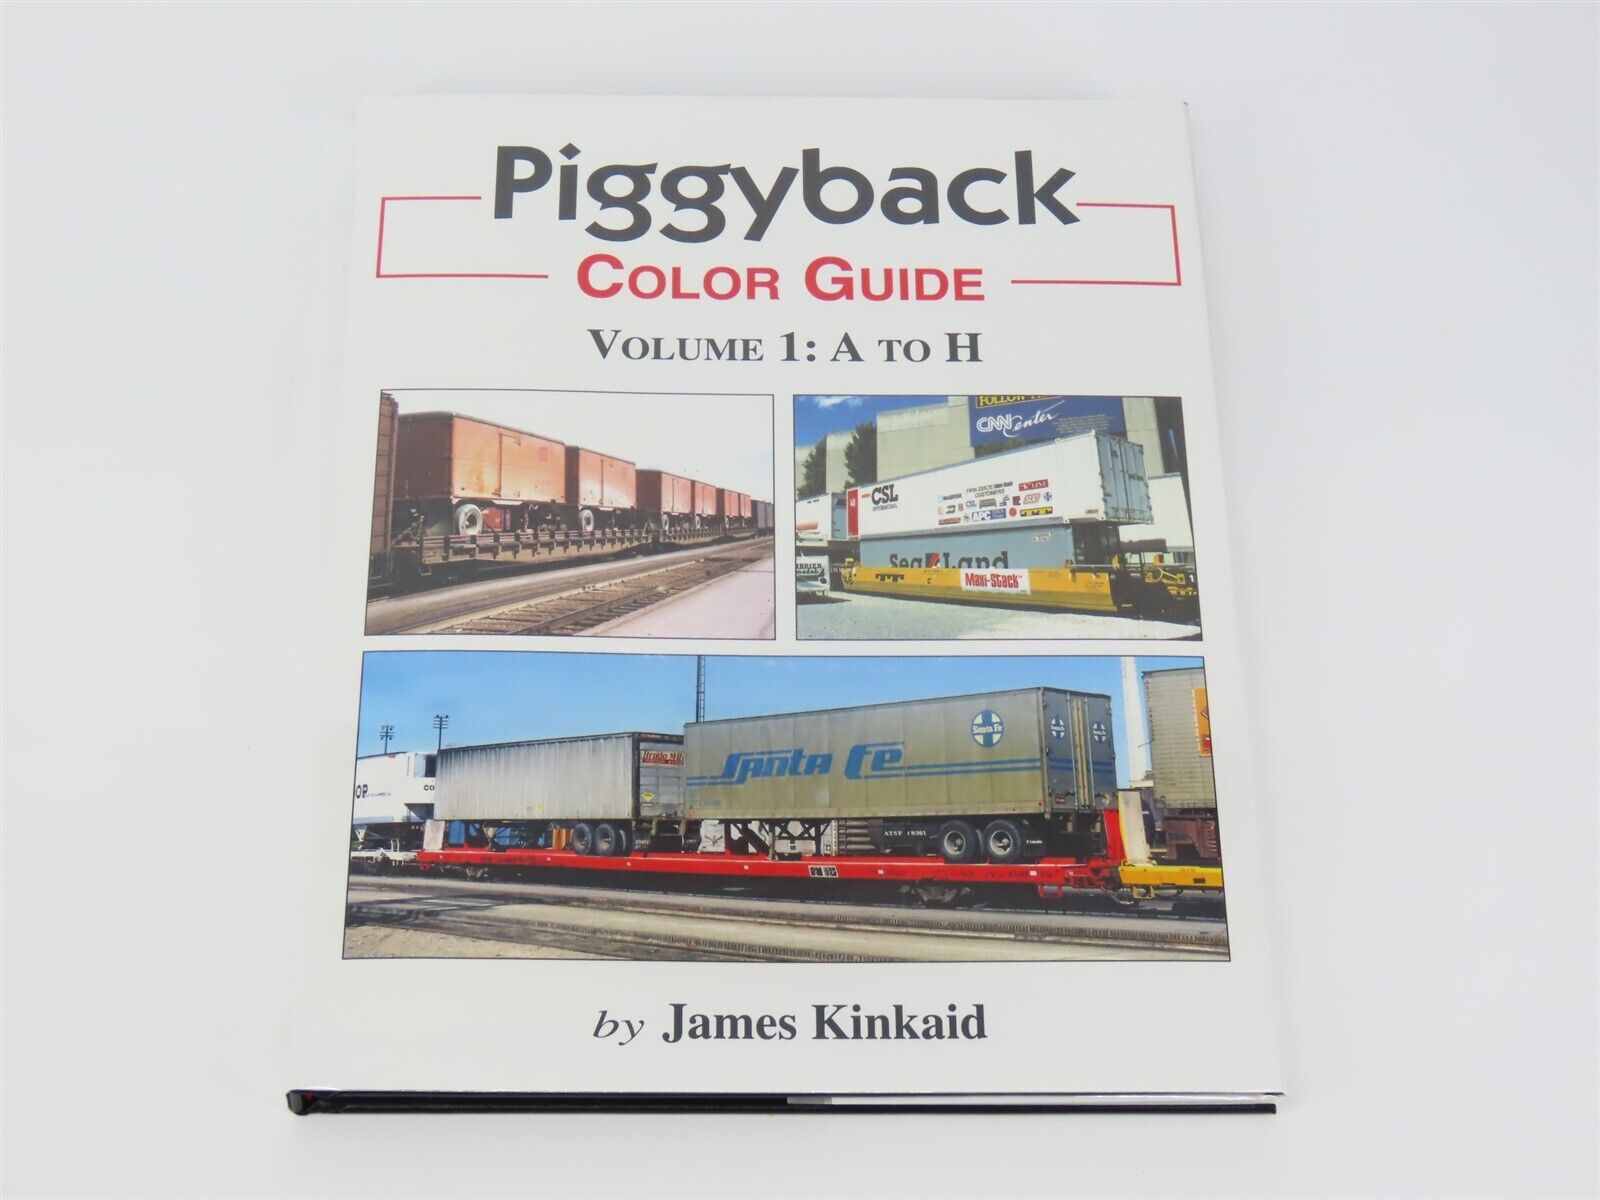 Morning Sun: Piggyback Color Guide Volume 1: A to H by James Kincaid ©2014 HC Bk